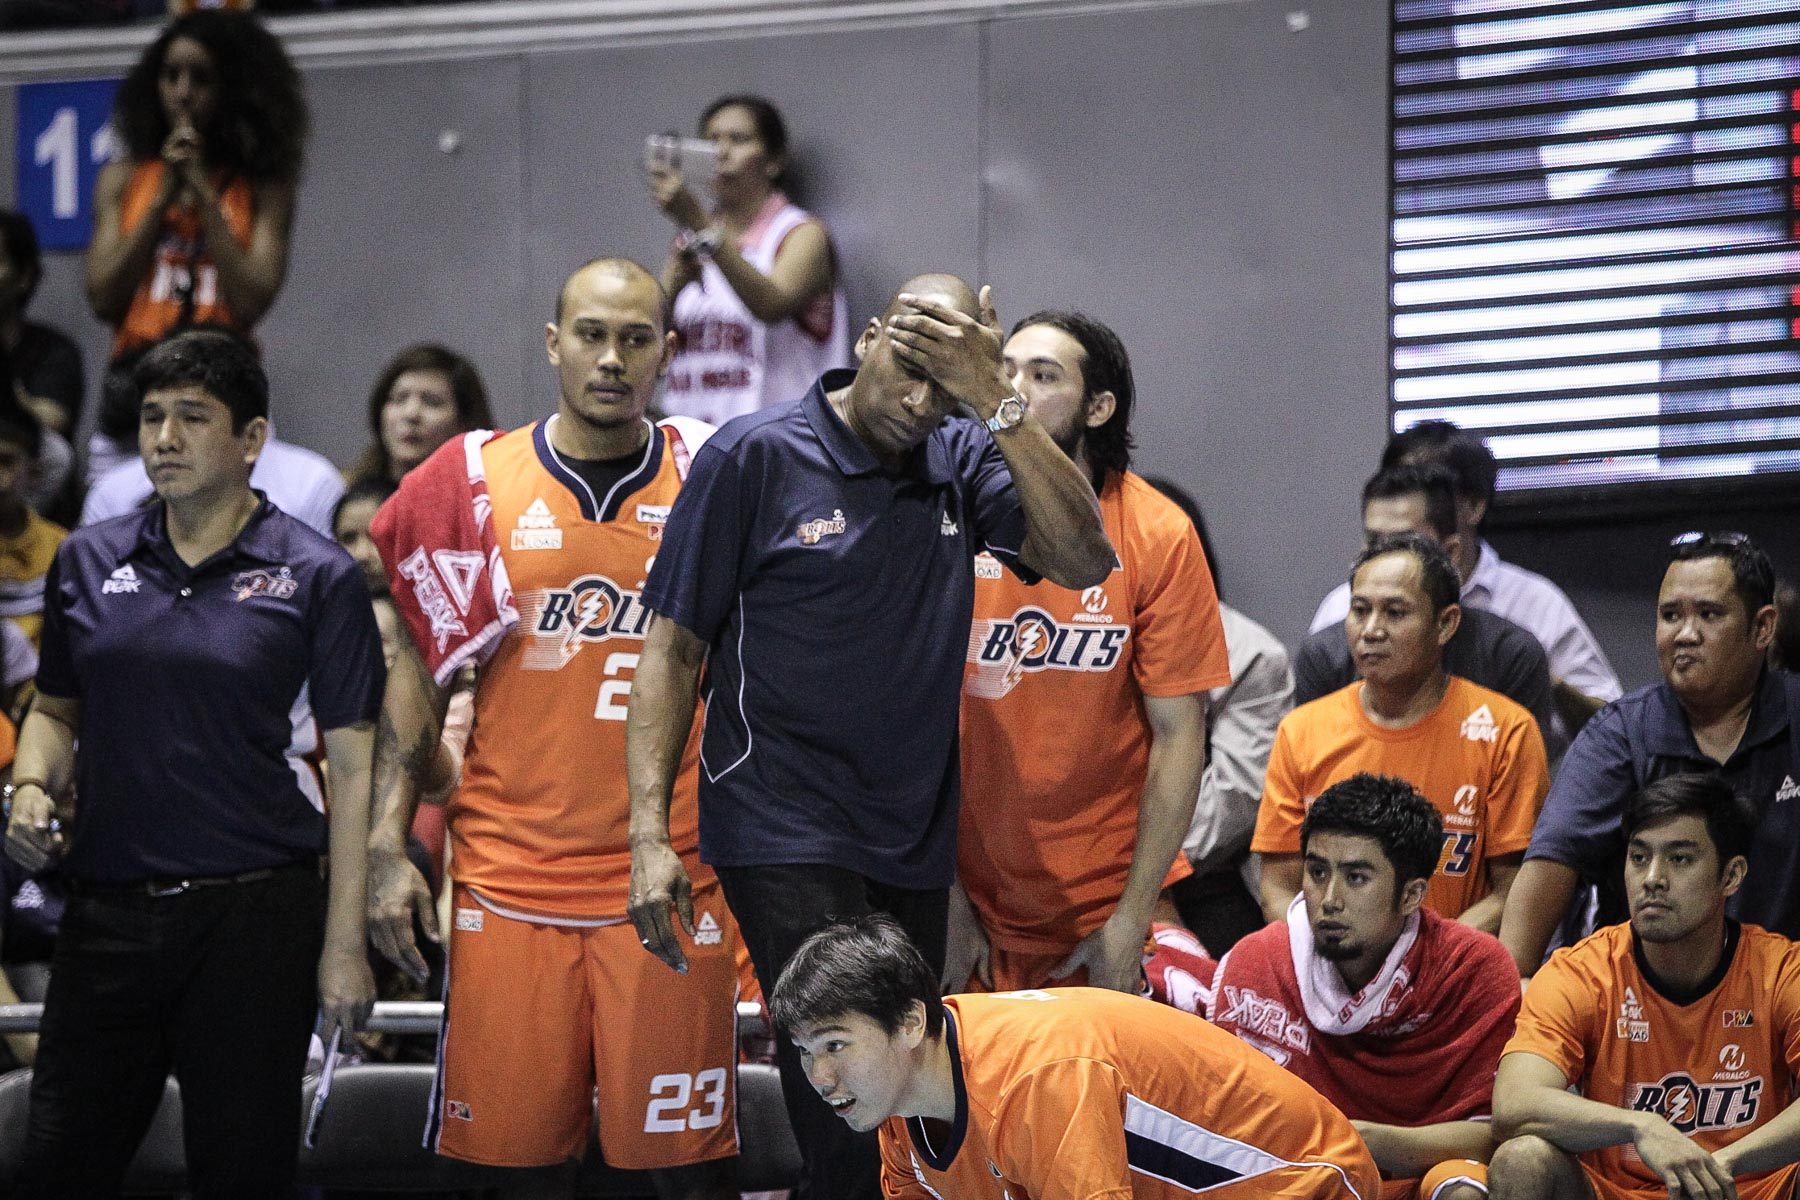 As Meralco licks wounds, Black sees promise for future: ‘We’re not finished yet’